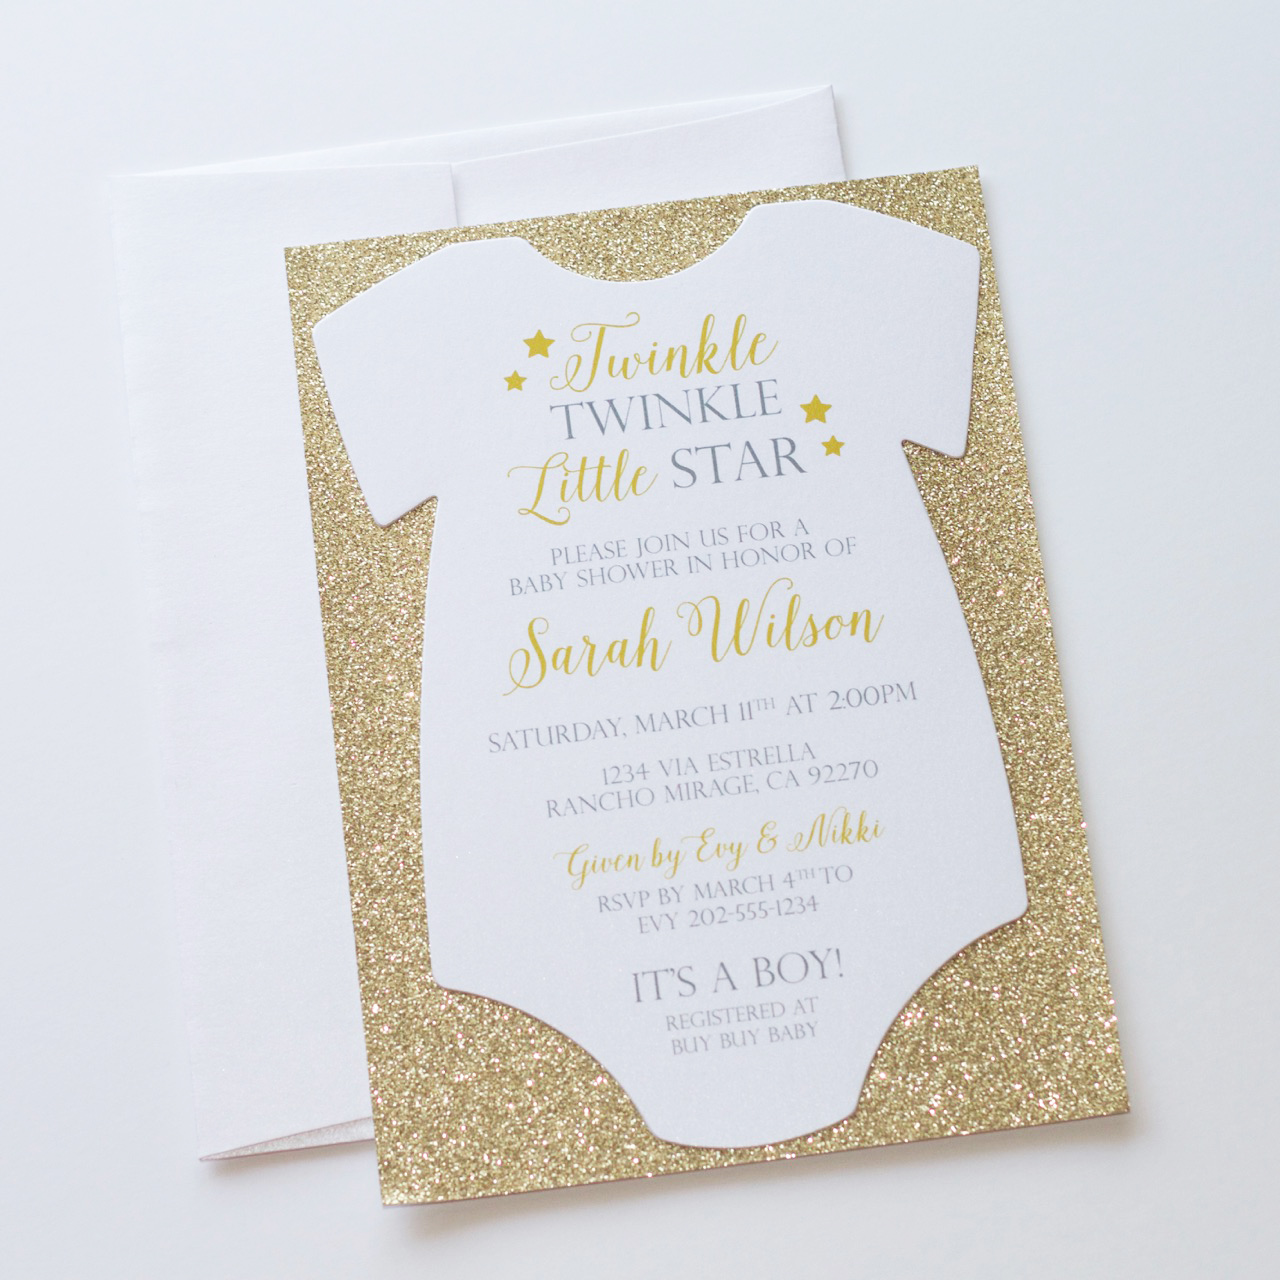 Twinkle Twinkle Little Star baby shower invitations in silver and pink 